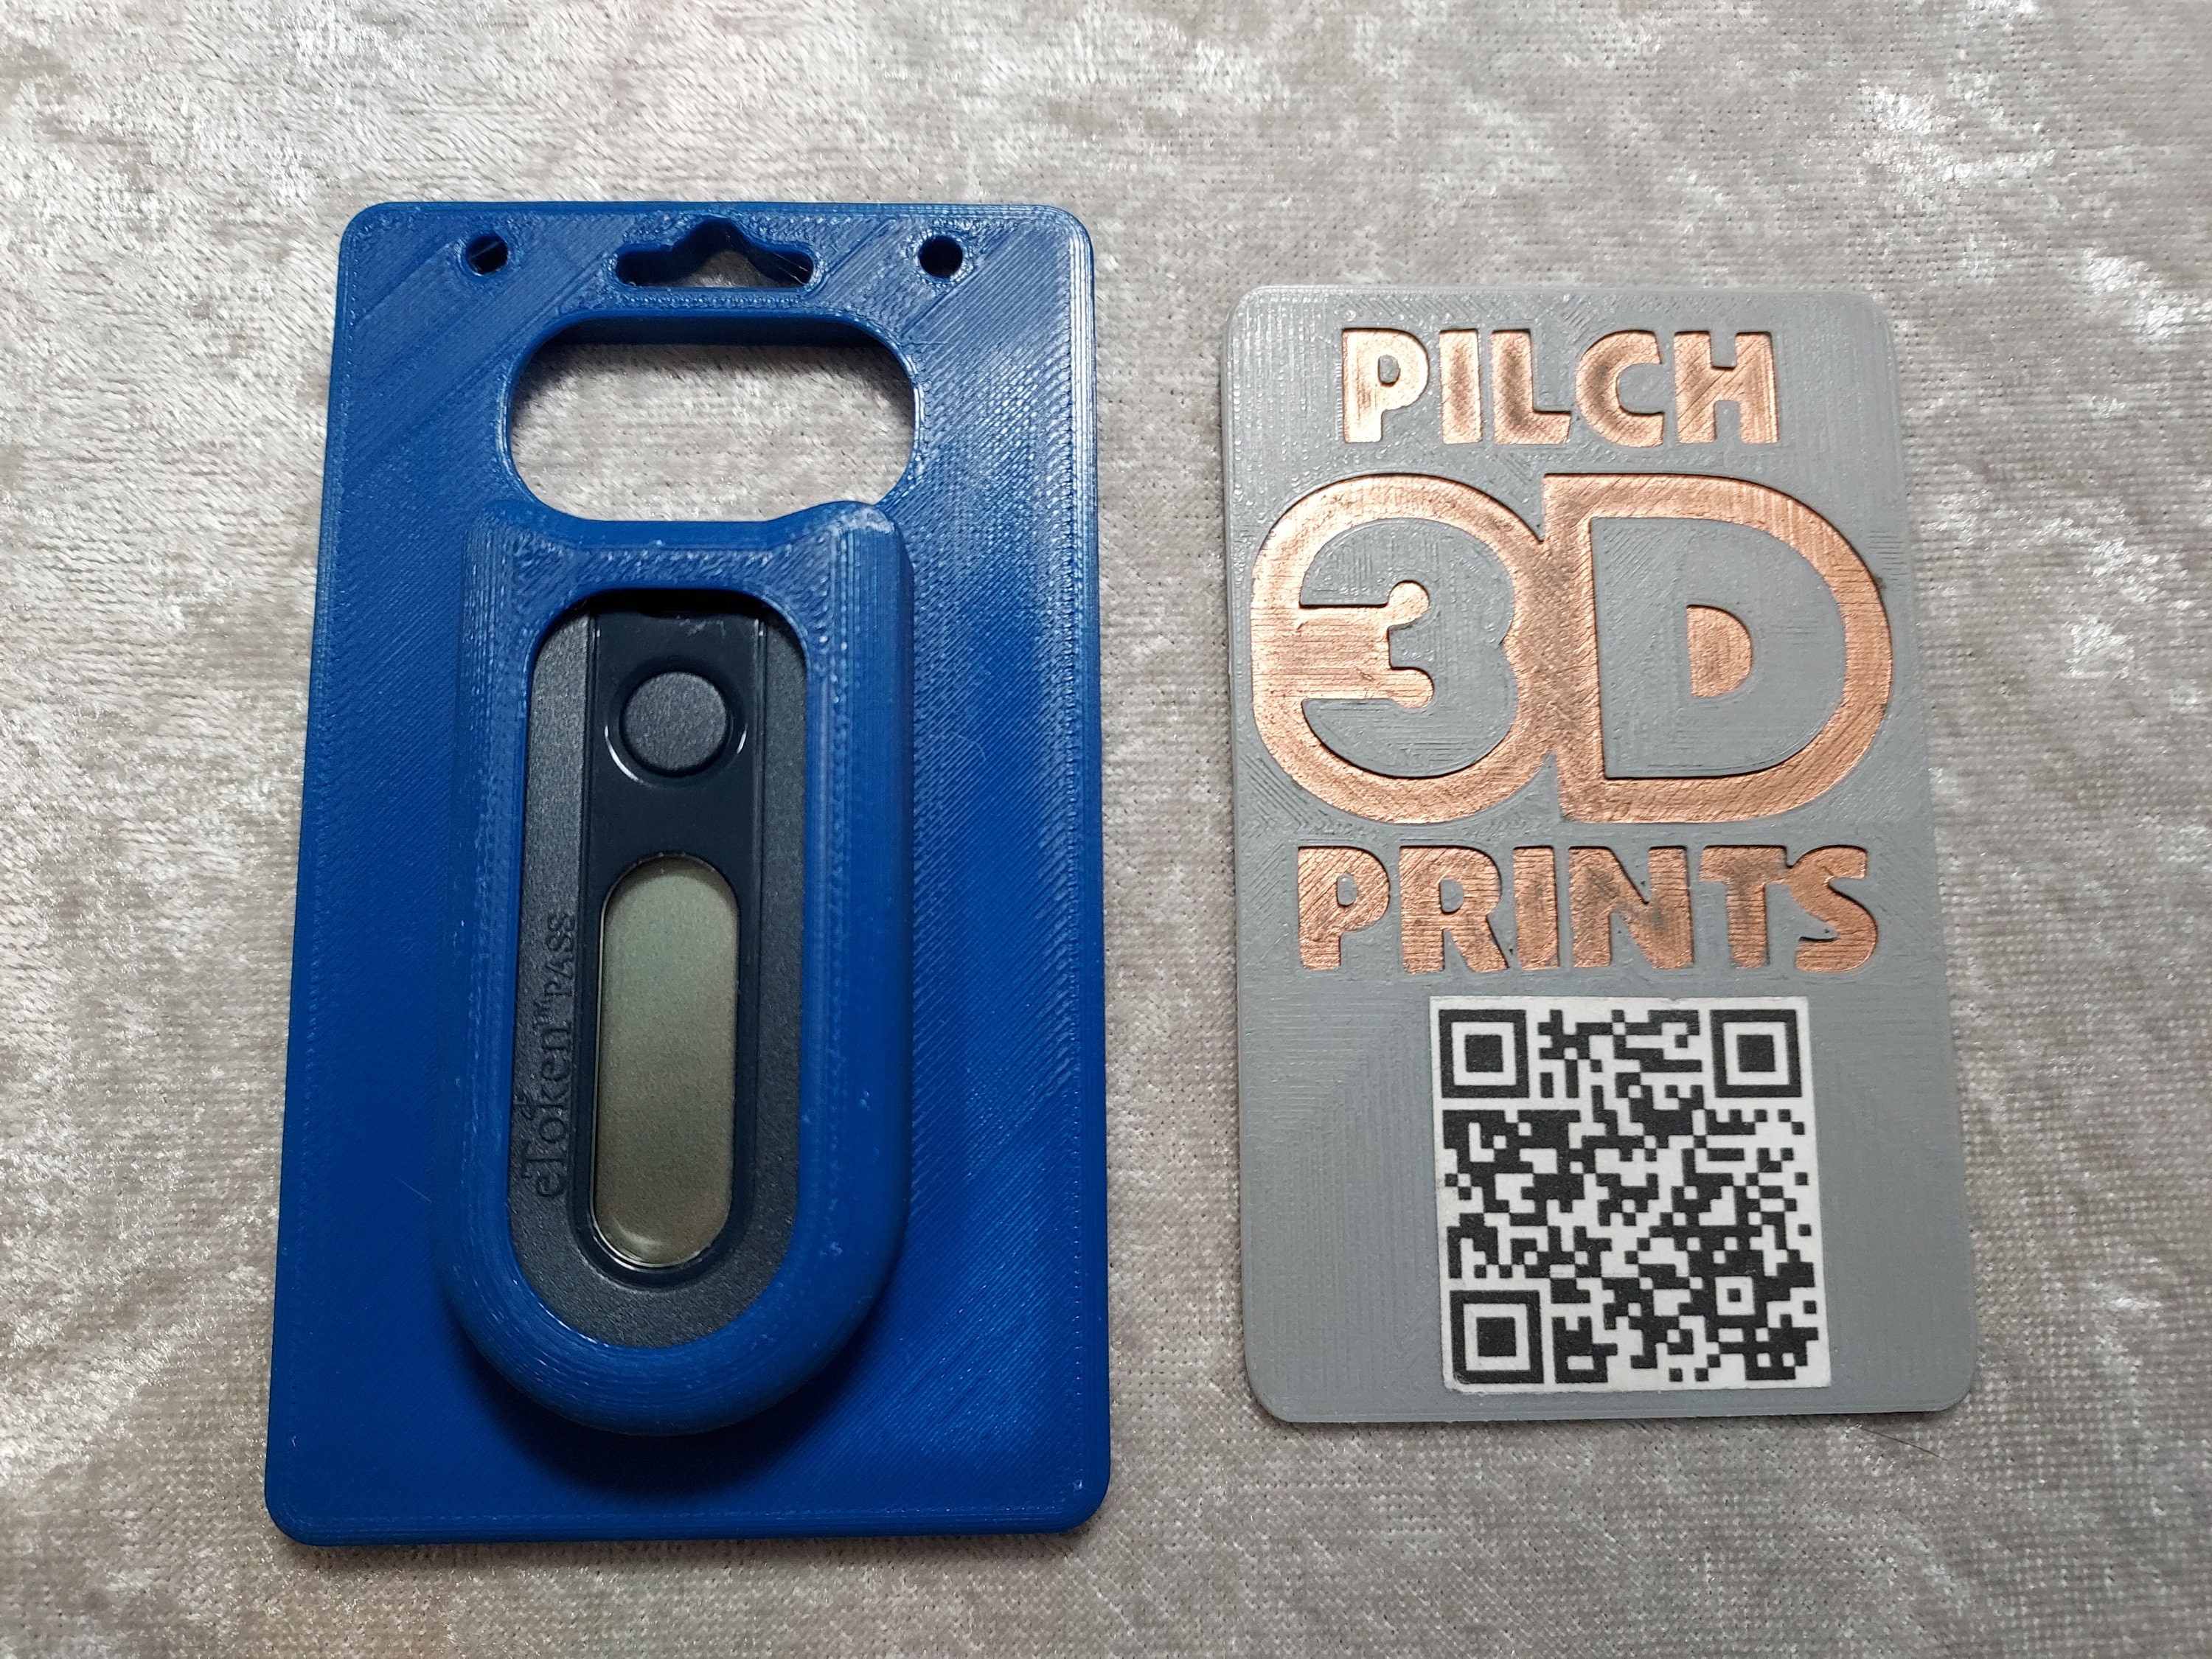 3D Printed Safenet Etoken Pass 1-3 Badge Holder multiple Color Options  Available -  Norway